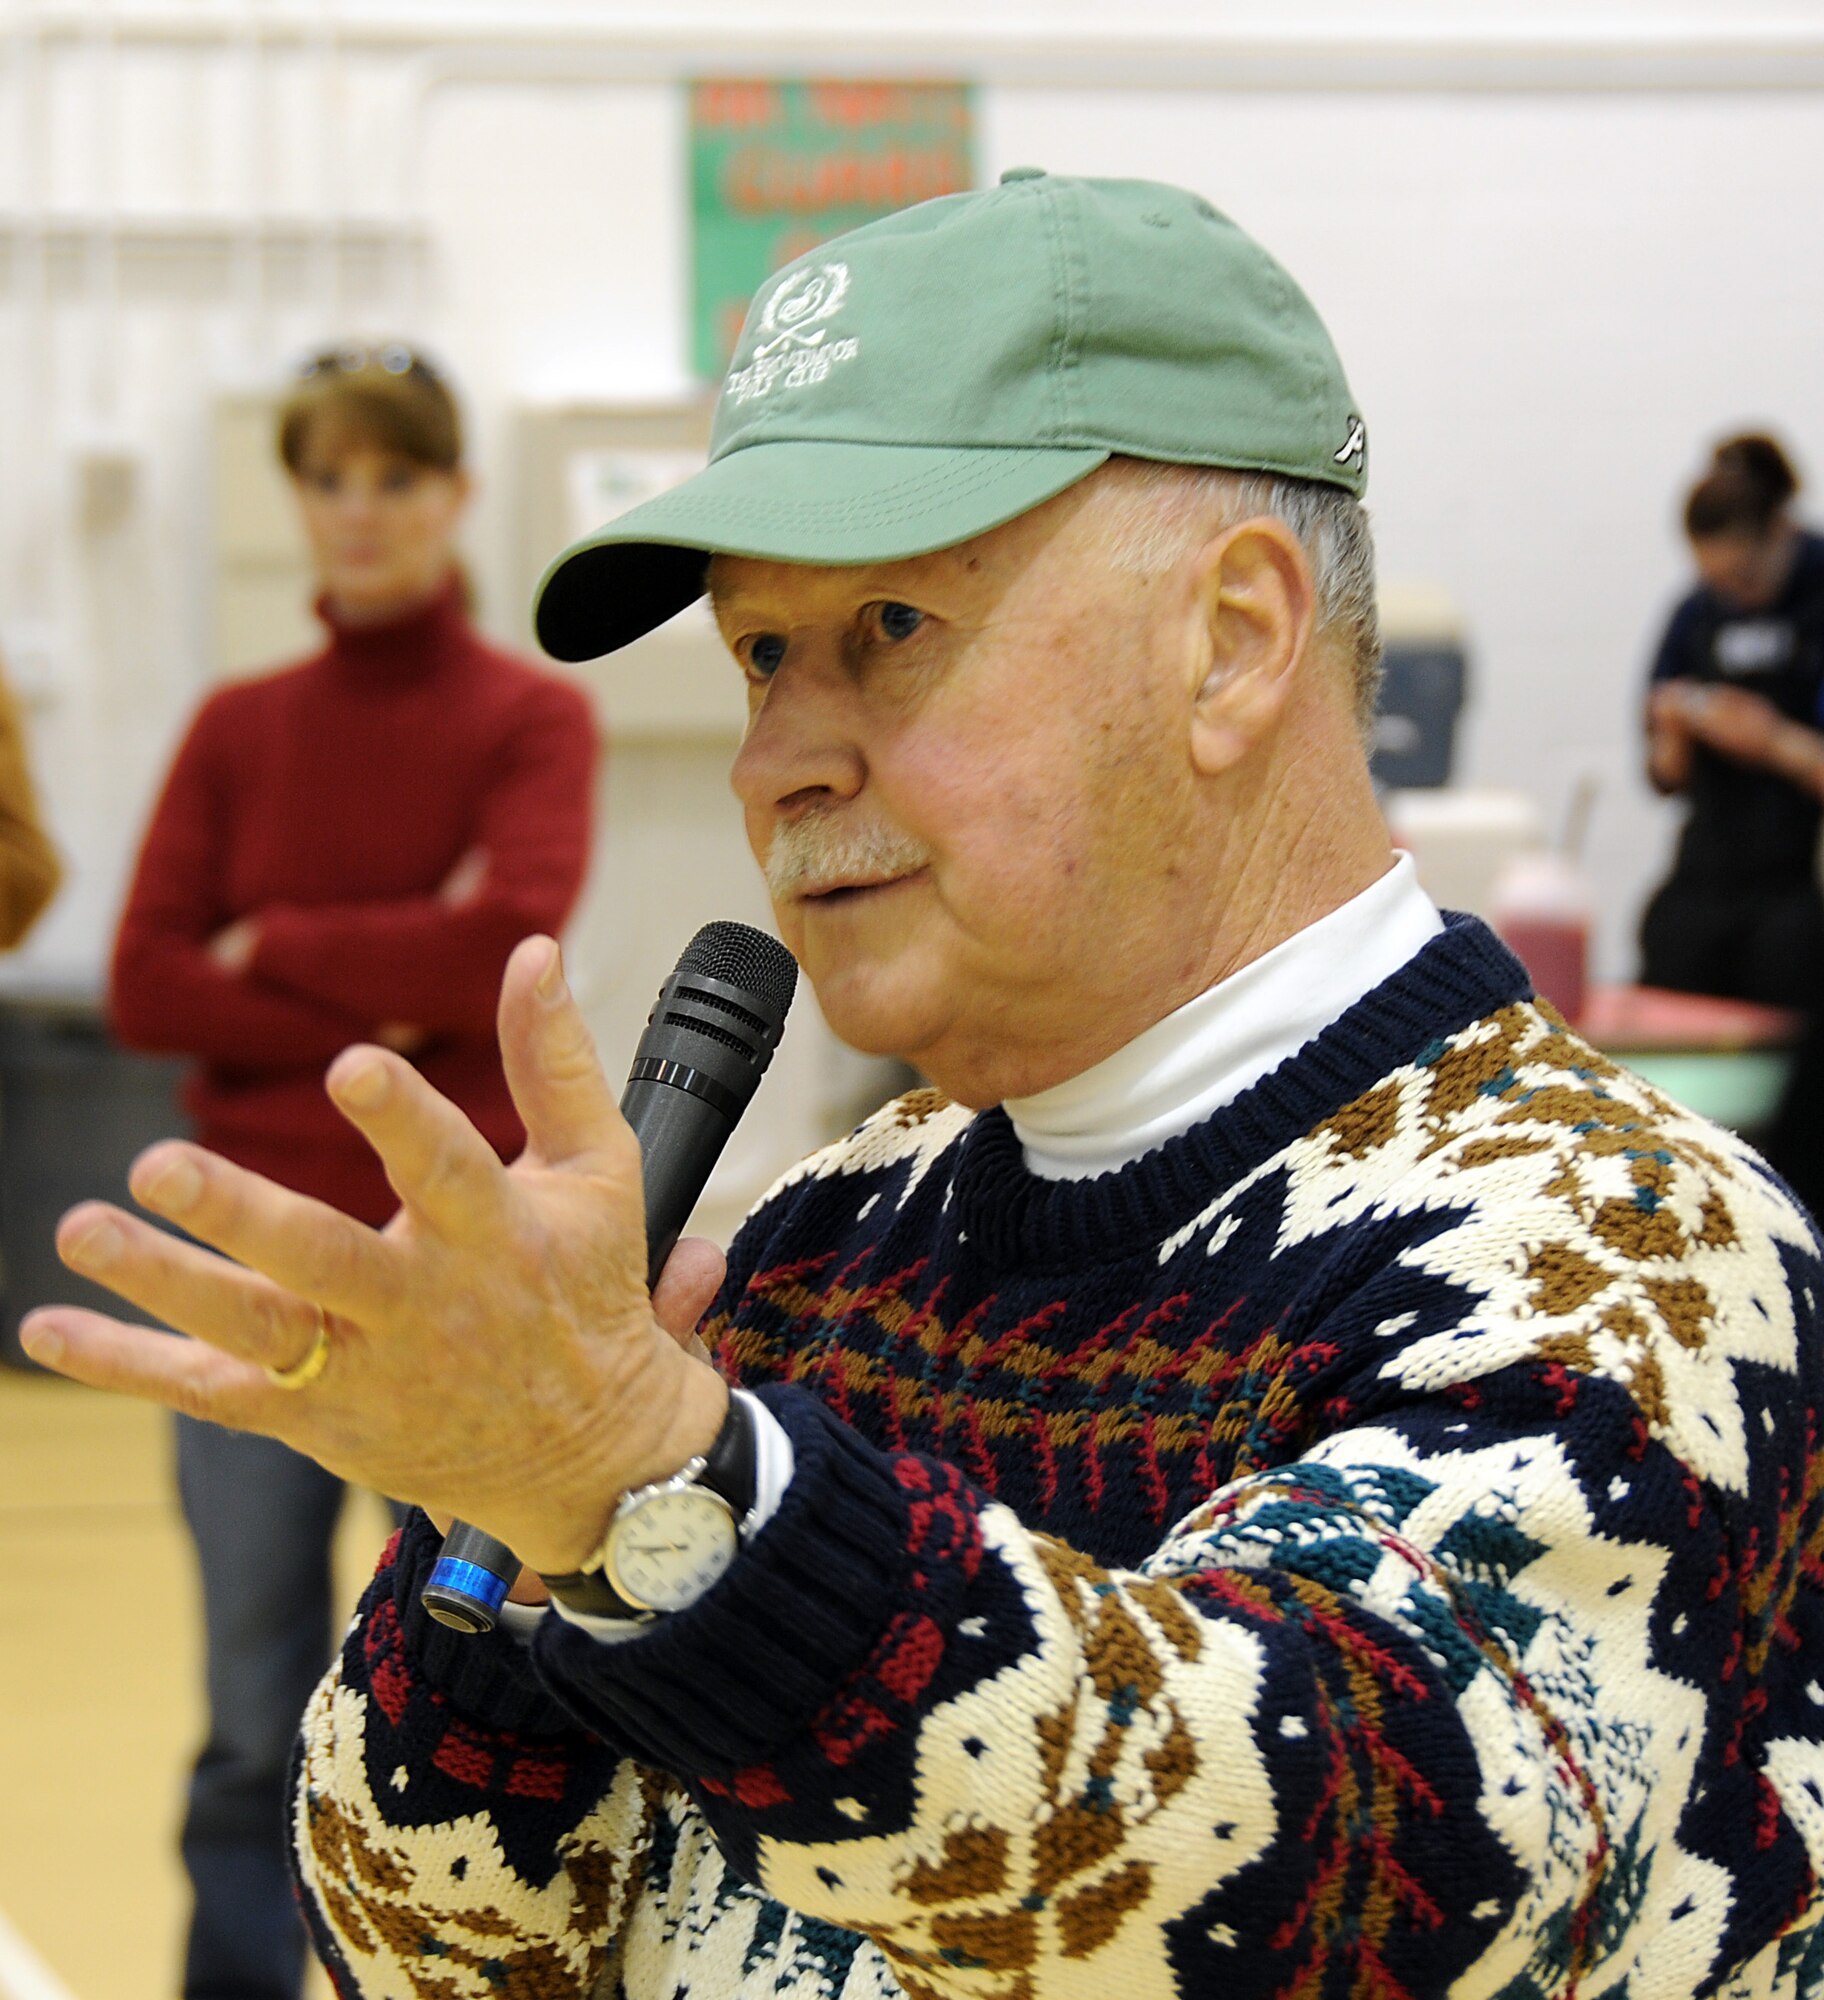 Brig. Gen. (ret.) Jake Lestenkoff, former adjutant general for the Alaska Air National Guard, addresses the crowd in the St. George School. It was a homecoming for Lestenkoff, who was born on St. George. U.S. Air Force photo by 1st Lt. John Callahan.